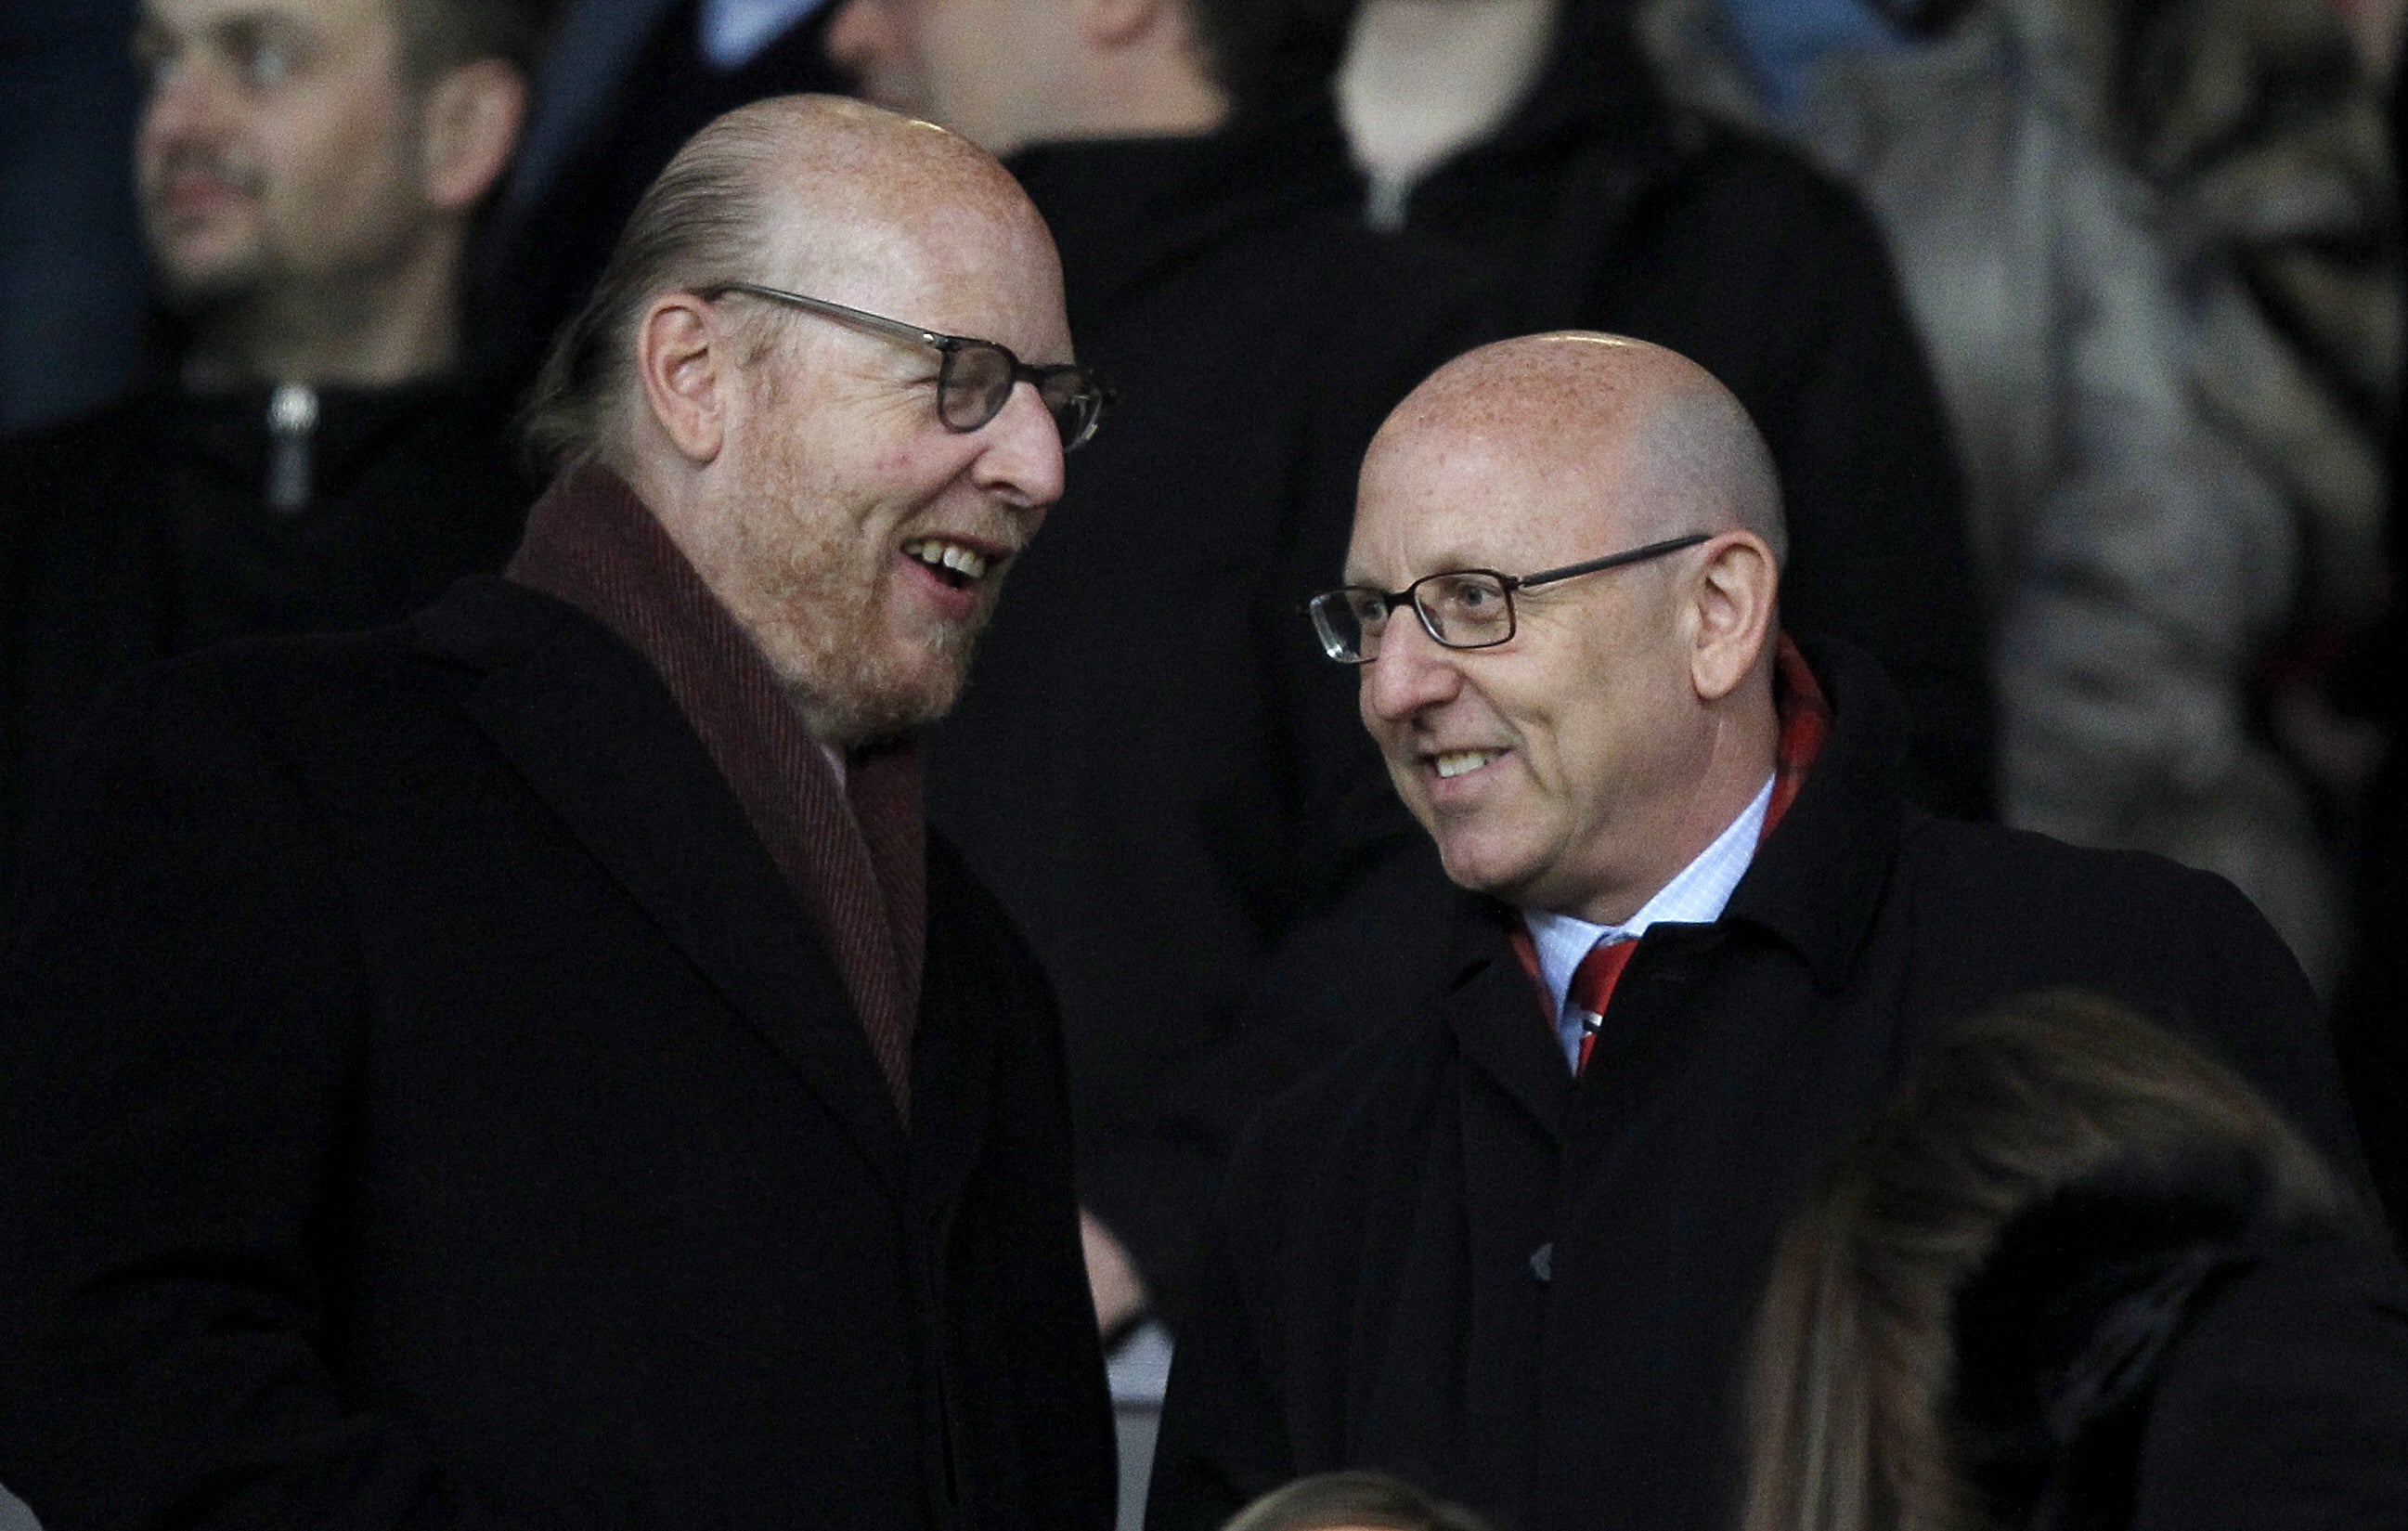 Manchester United co-chairman Joel Glazer, pictured right with brother Avram, was involved in planning for the Super League (Dave Thompson/PA)